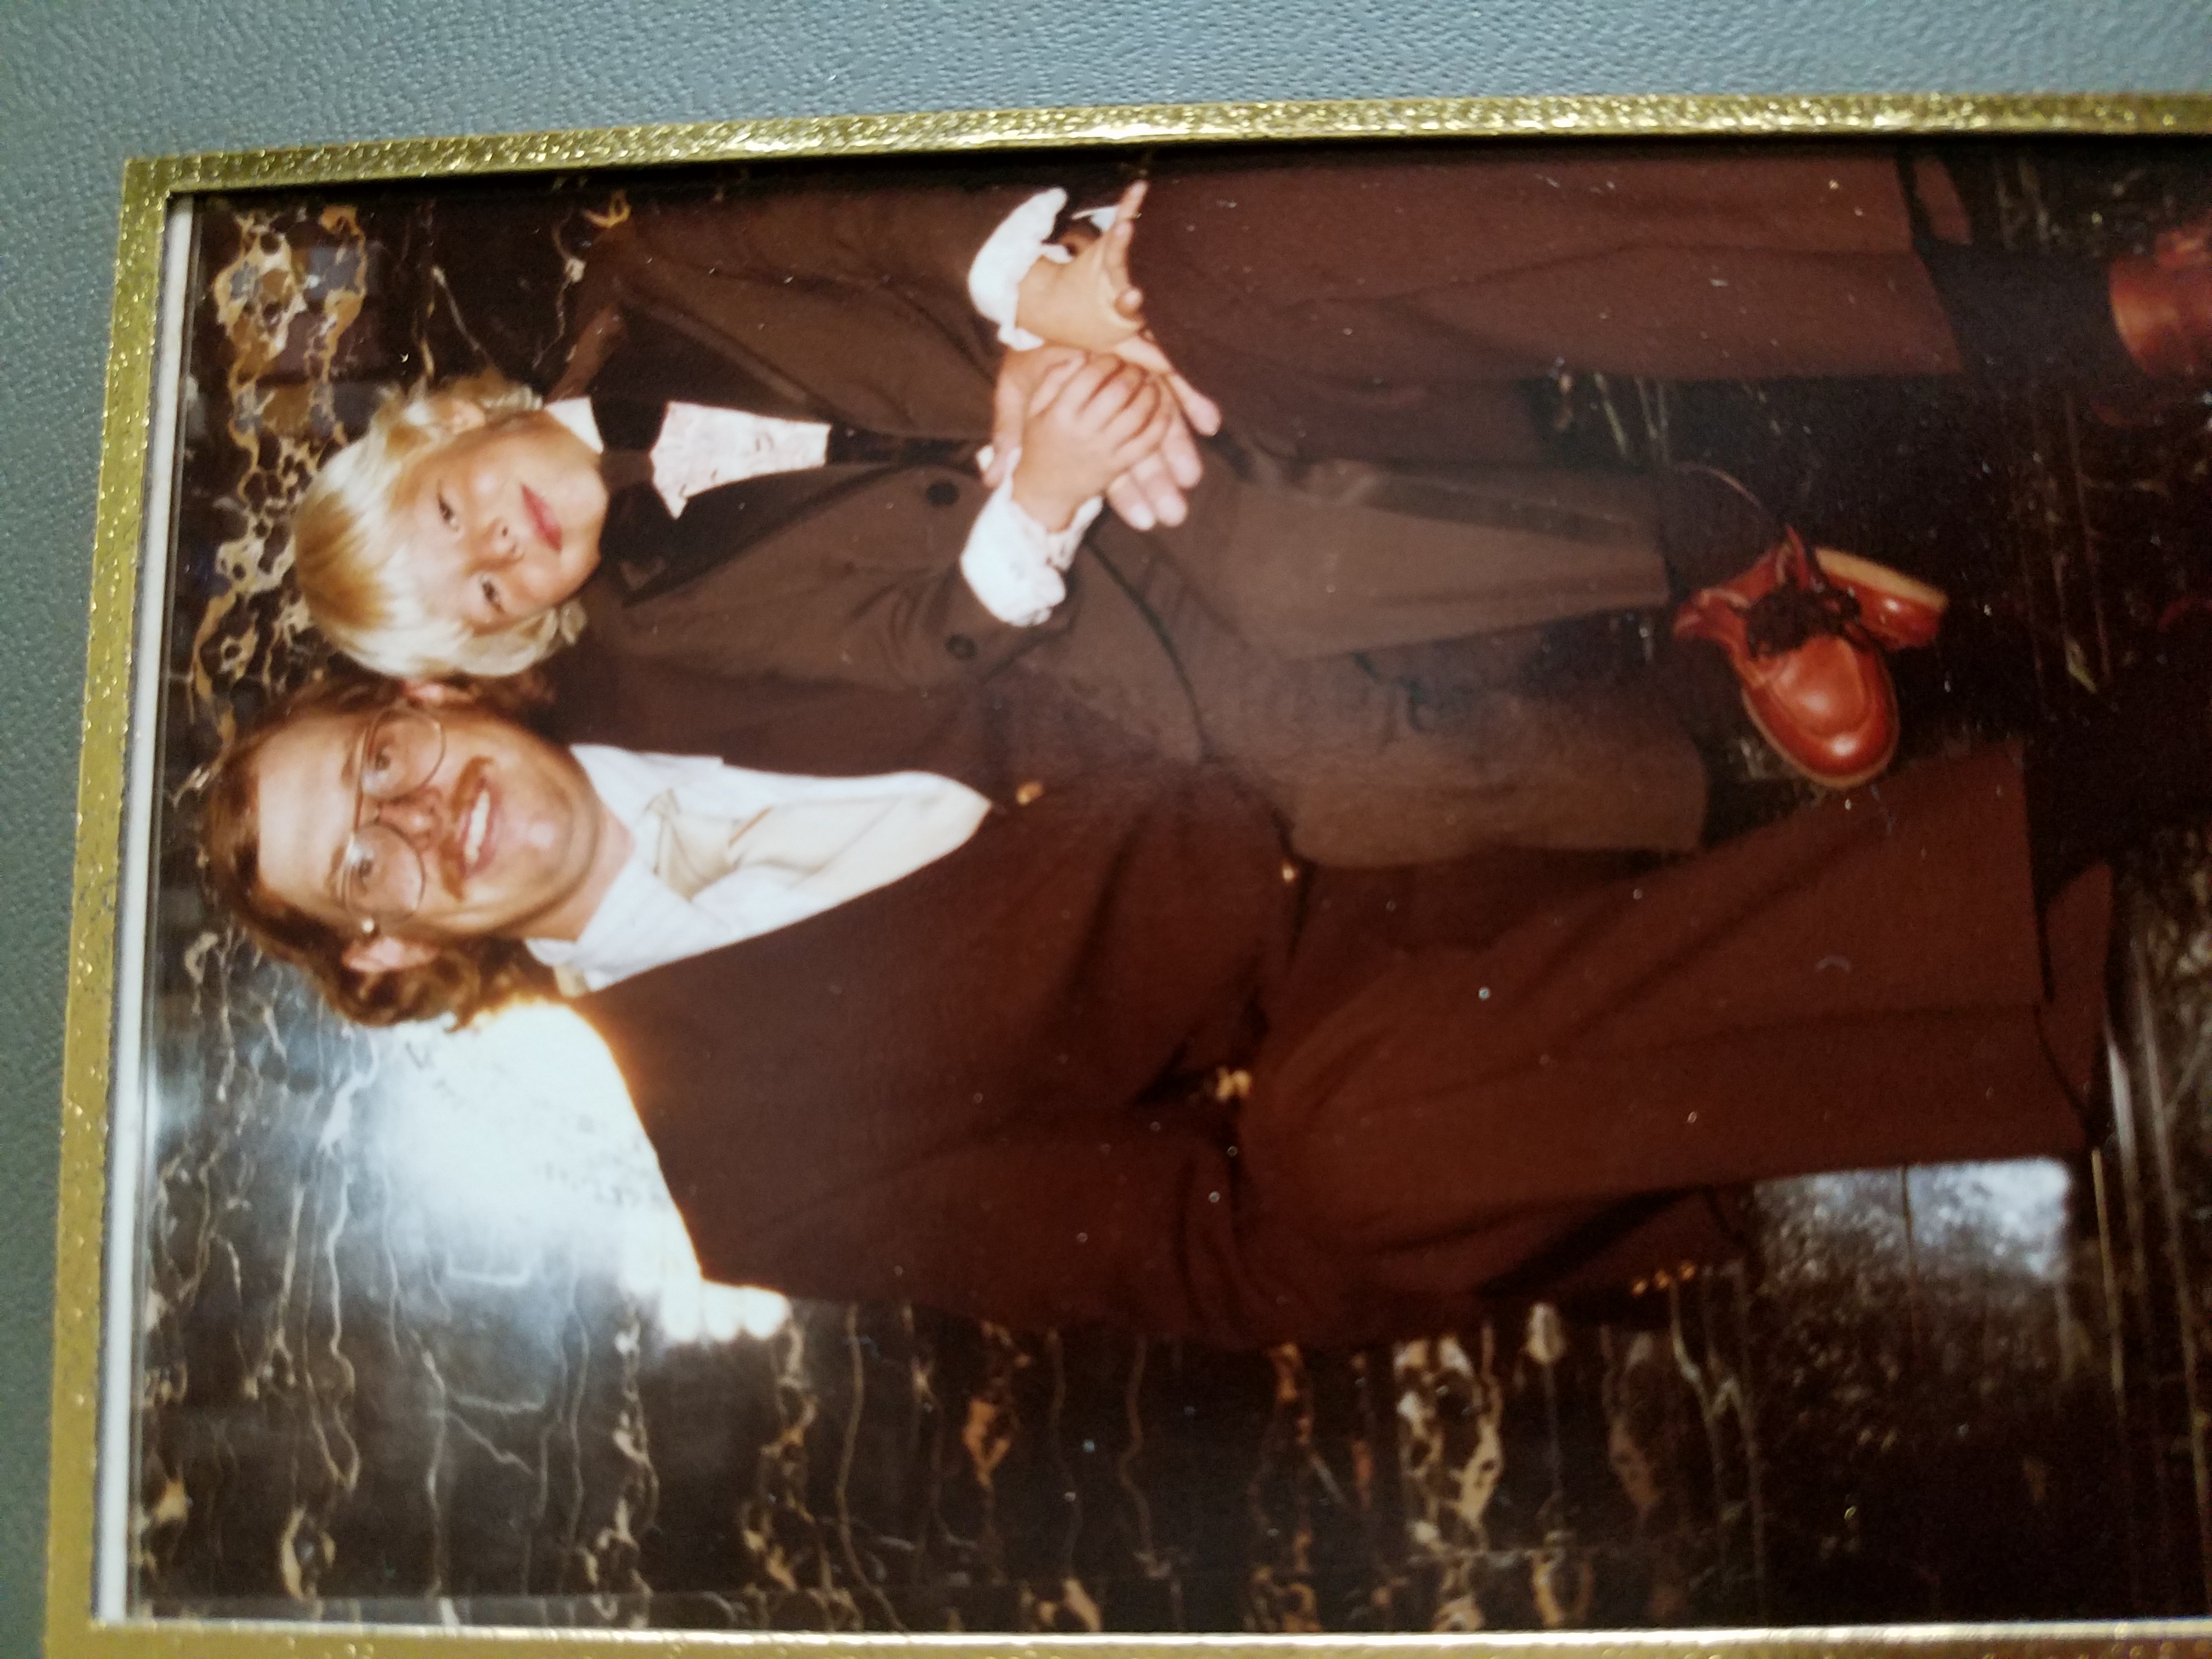 Billy and Shawn from my wedding 1981